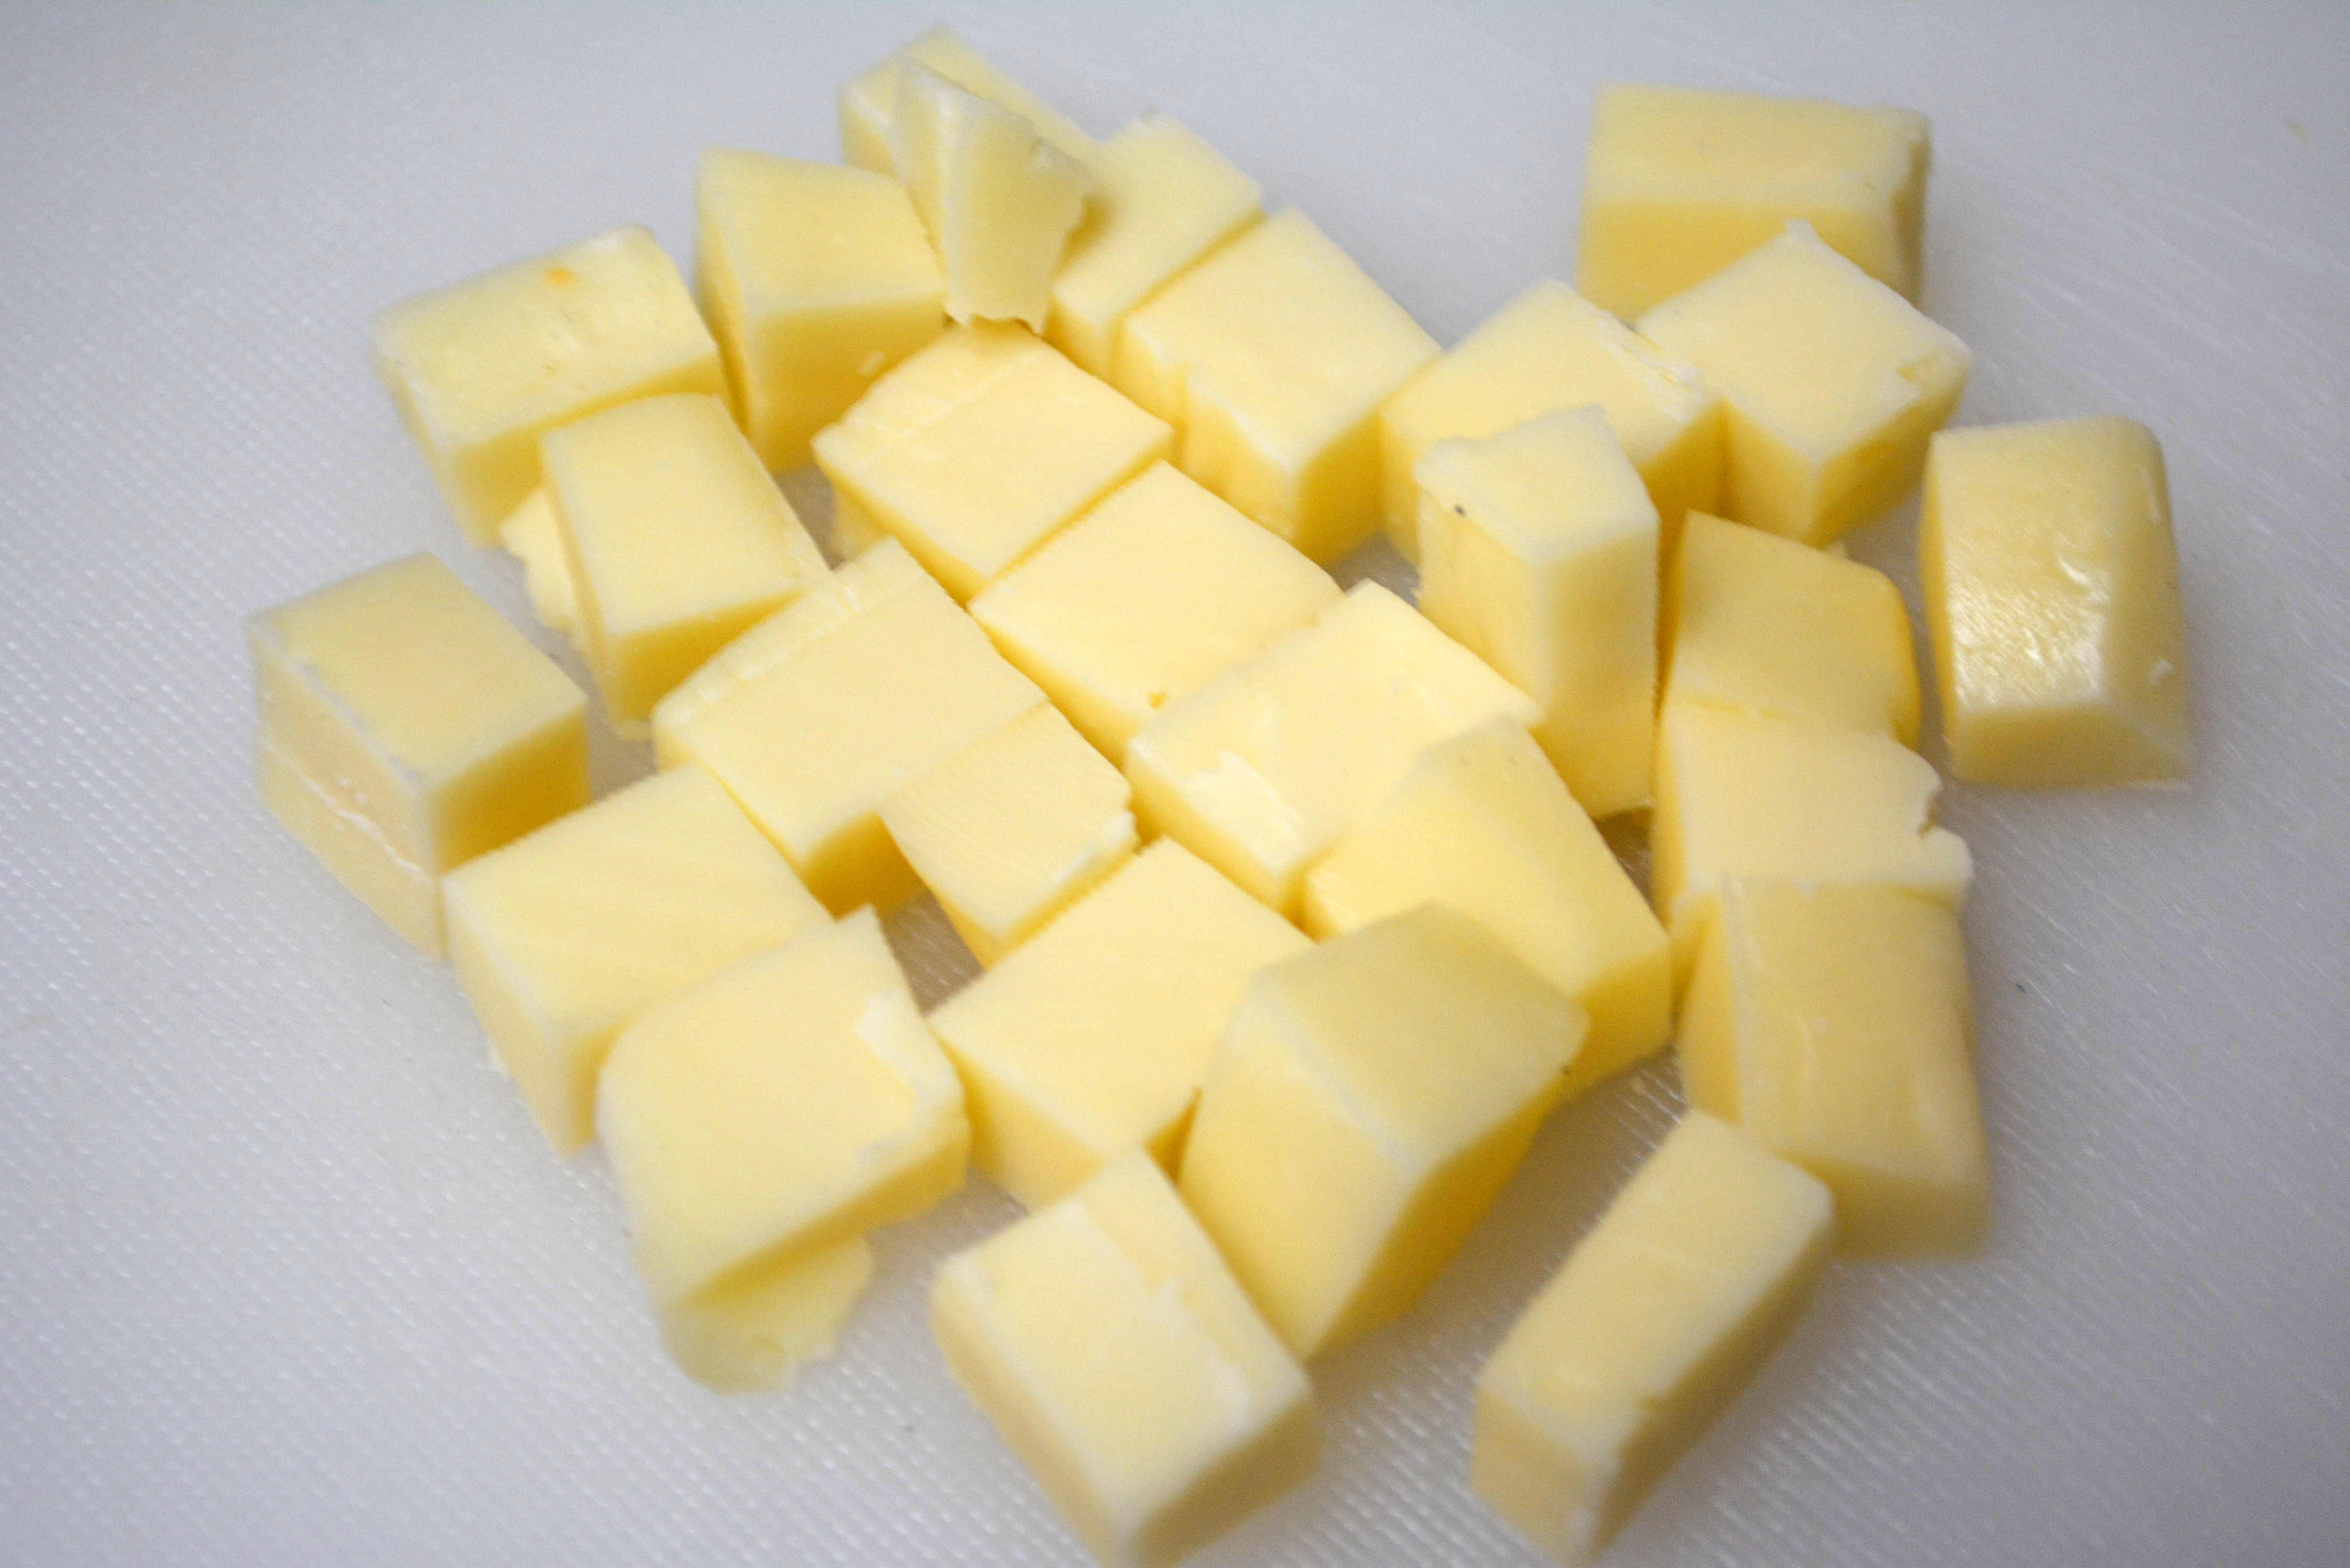 Provolone Cheese In Squares, Cheese, Cooking, Food, Provolone, HQ Photo